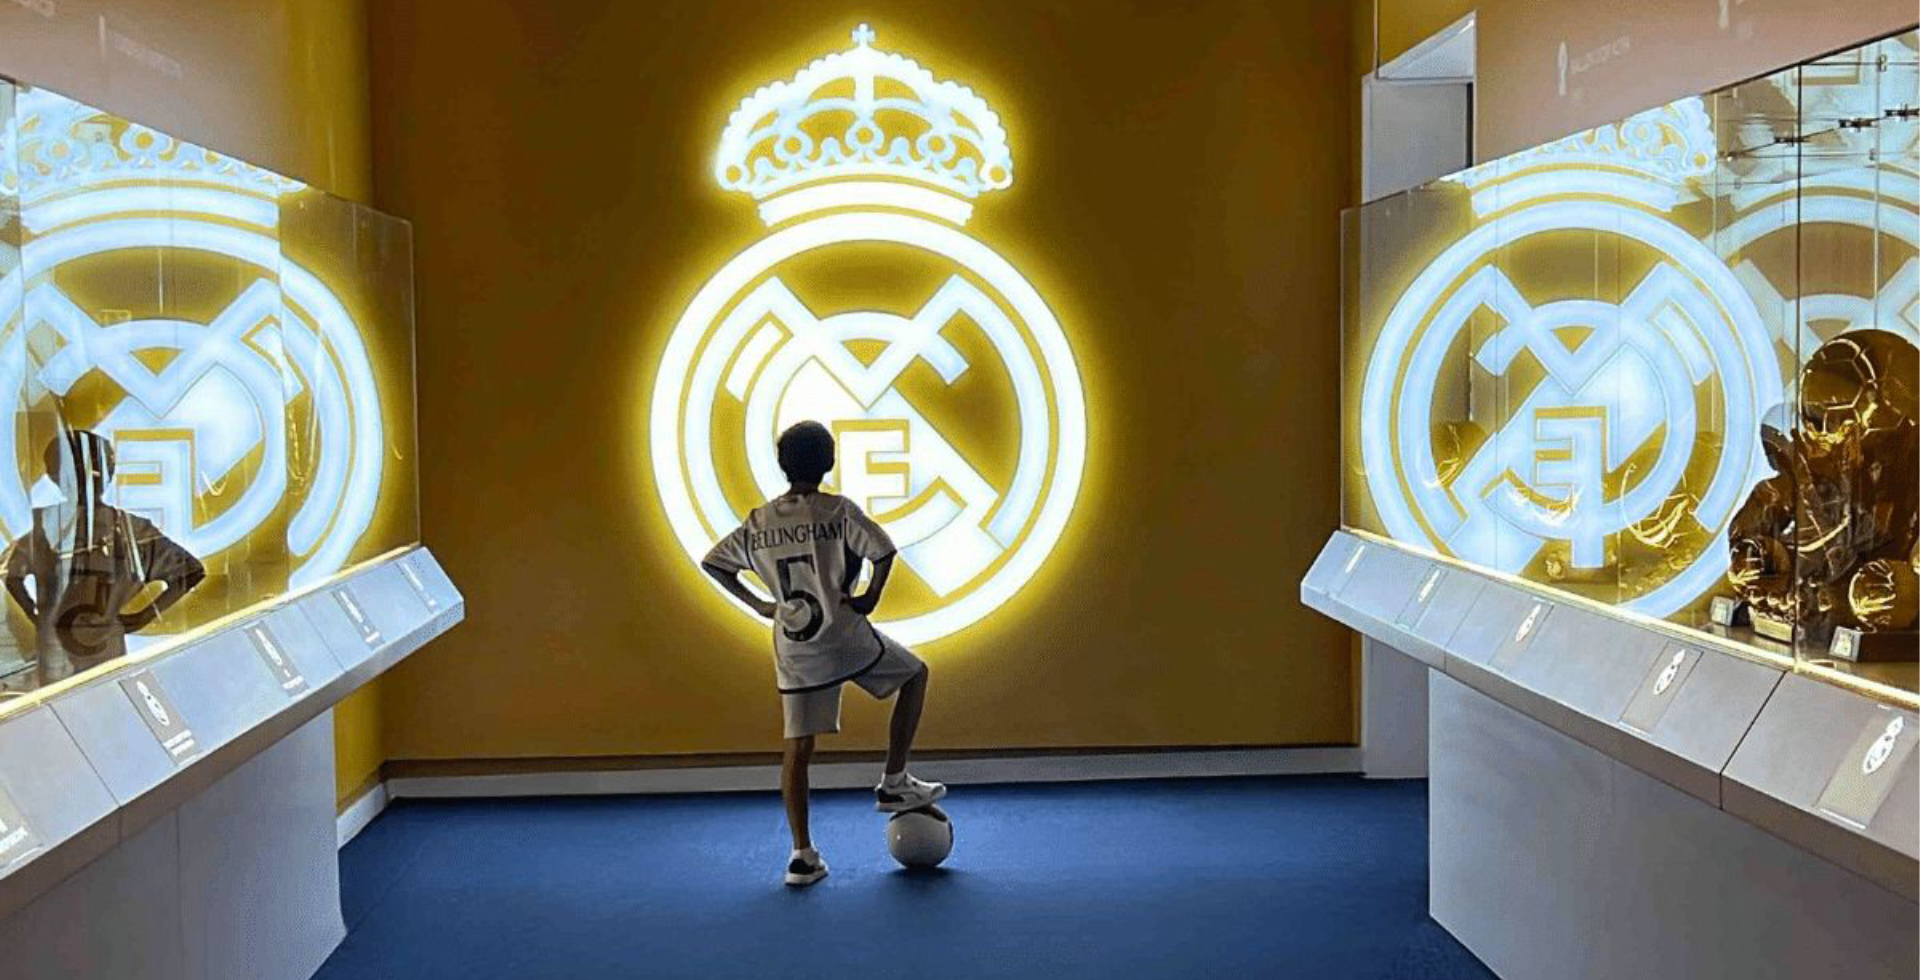 The World’s First Real Madrid World Theme Park is now open in Dubai